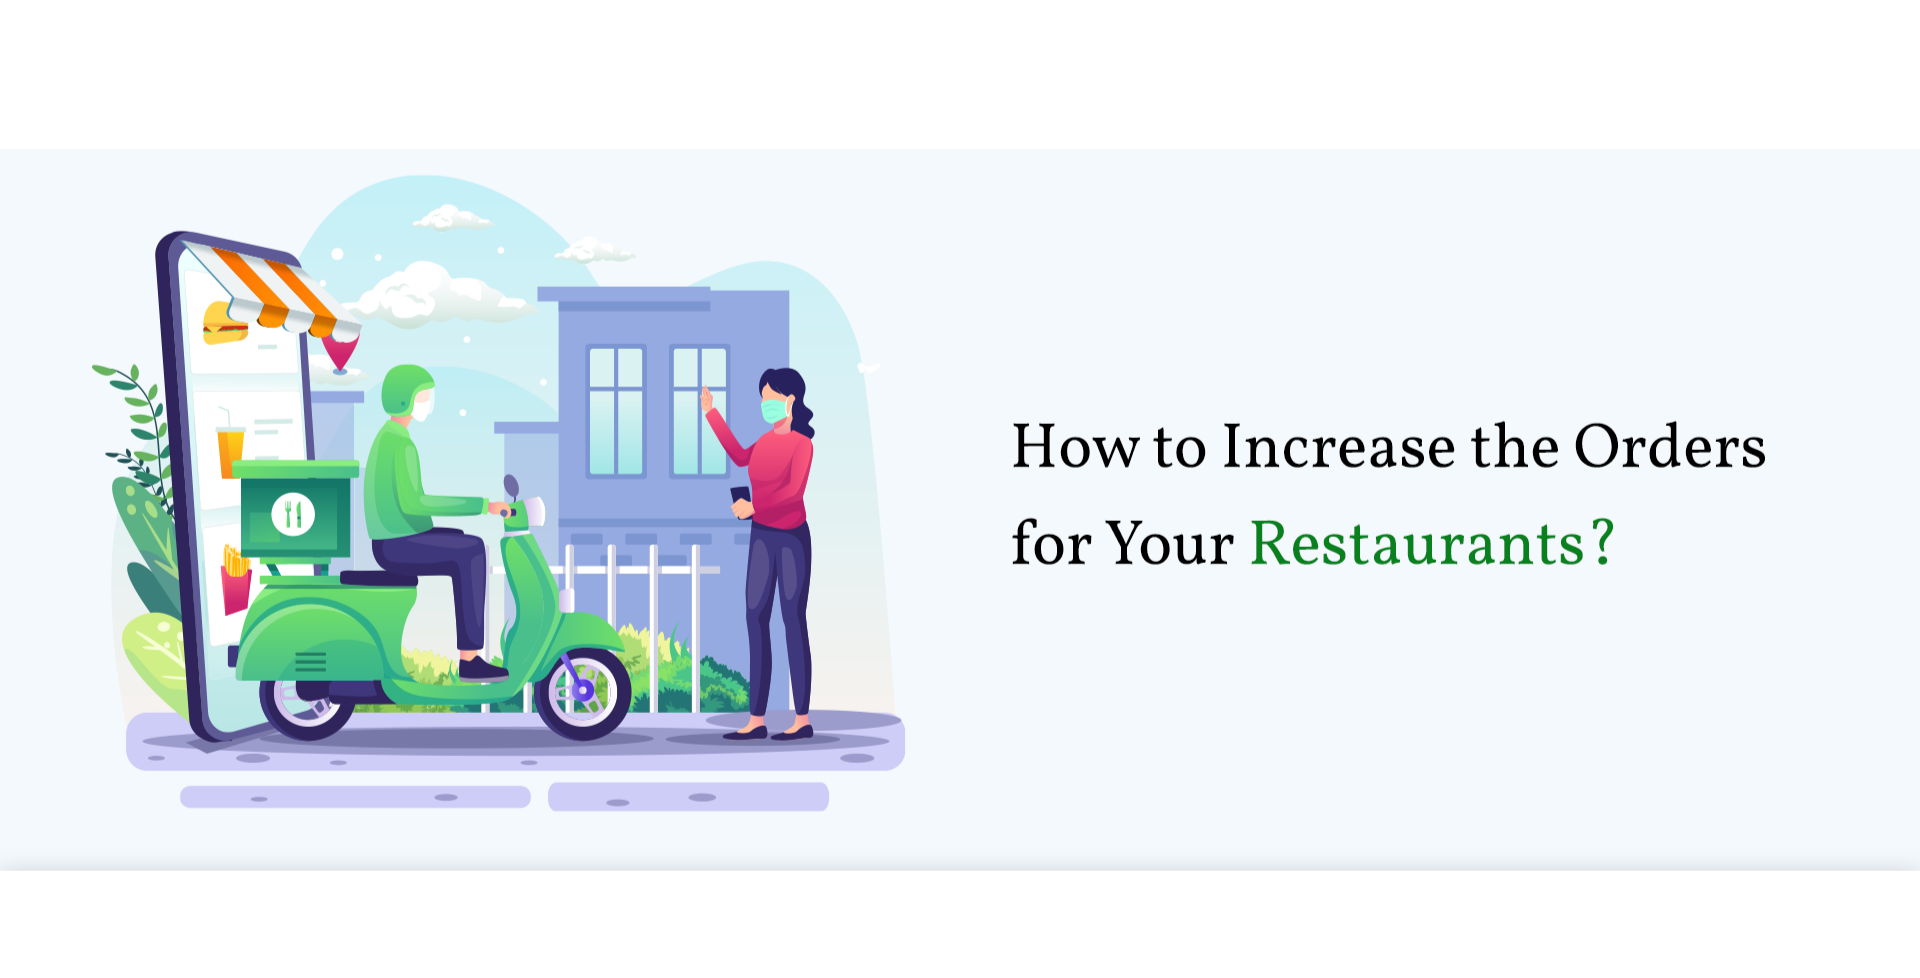 How to Increase the Orders for Your Restaurants